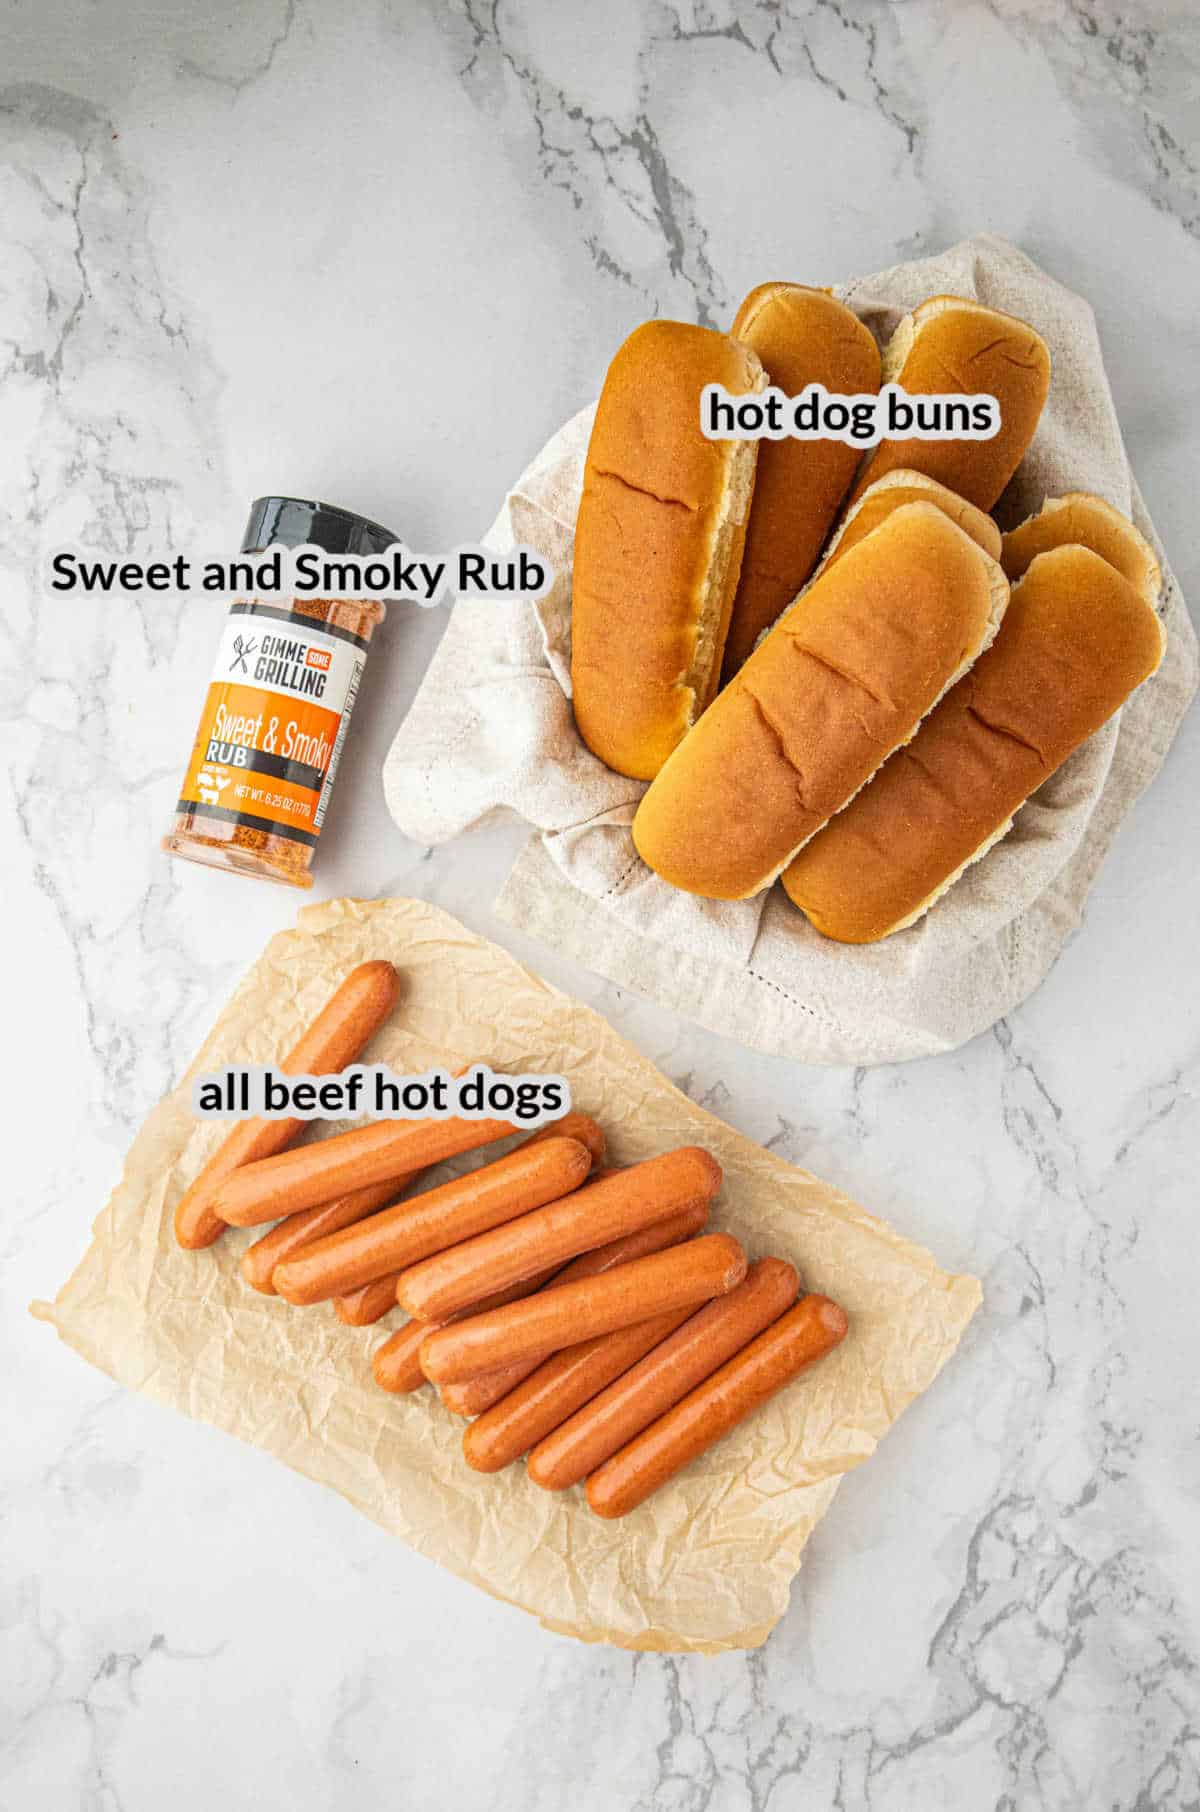 Overhead Image of Smoked Hot Dogs Ingredients